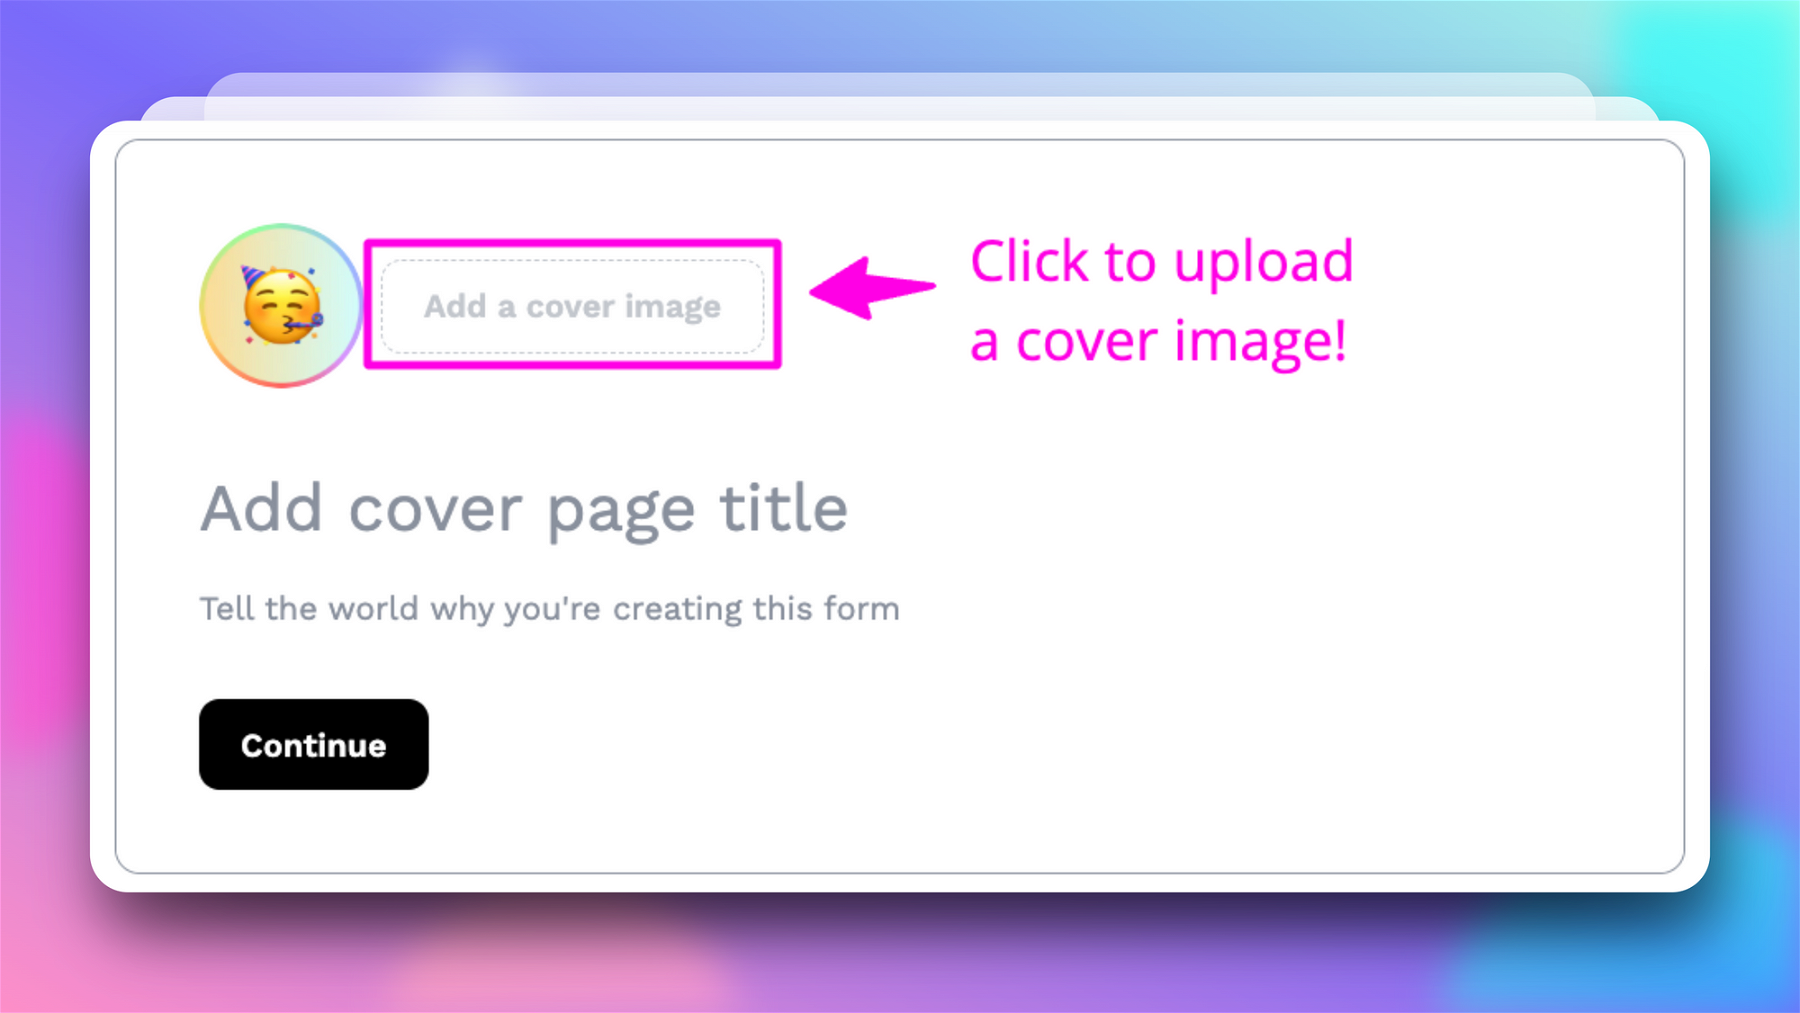 Screenshot of the cover page tab. This image illustrates to click the “Add a cover image” button to begin uploading a cover image.